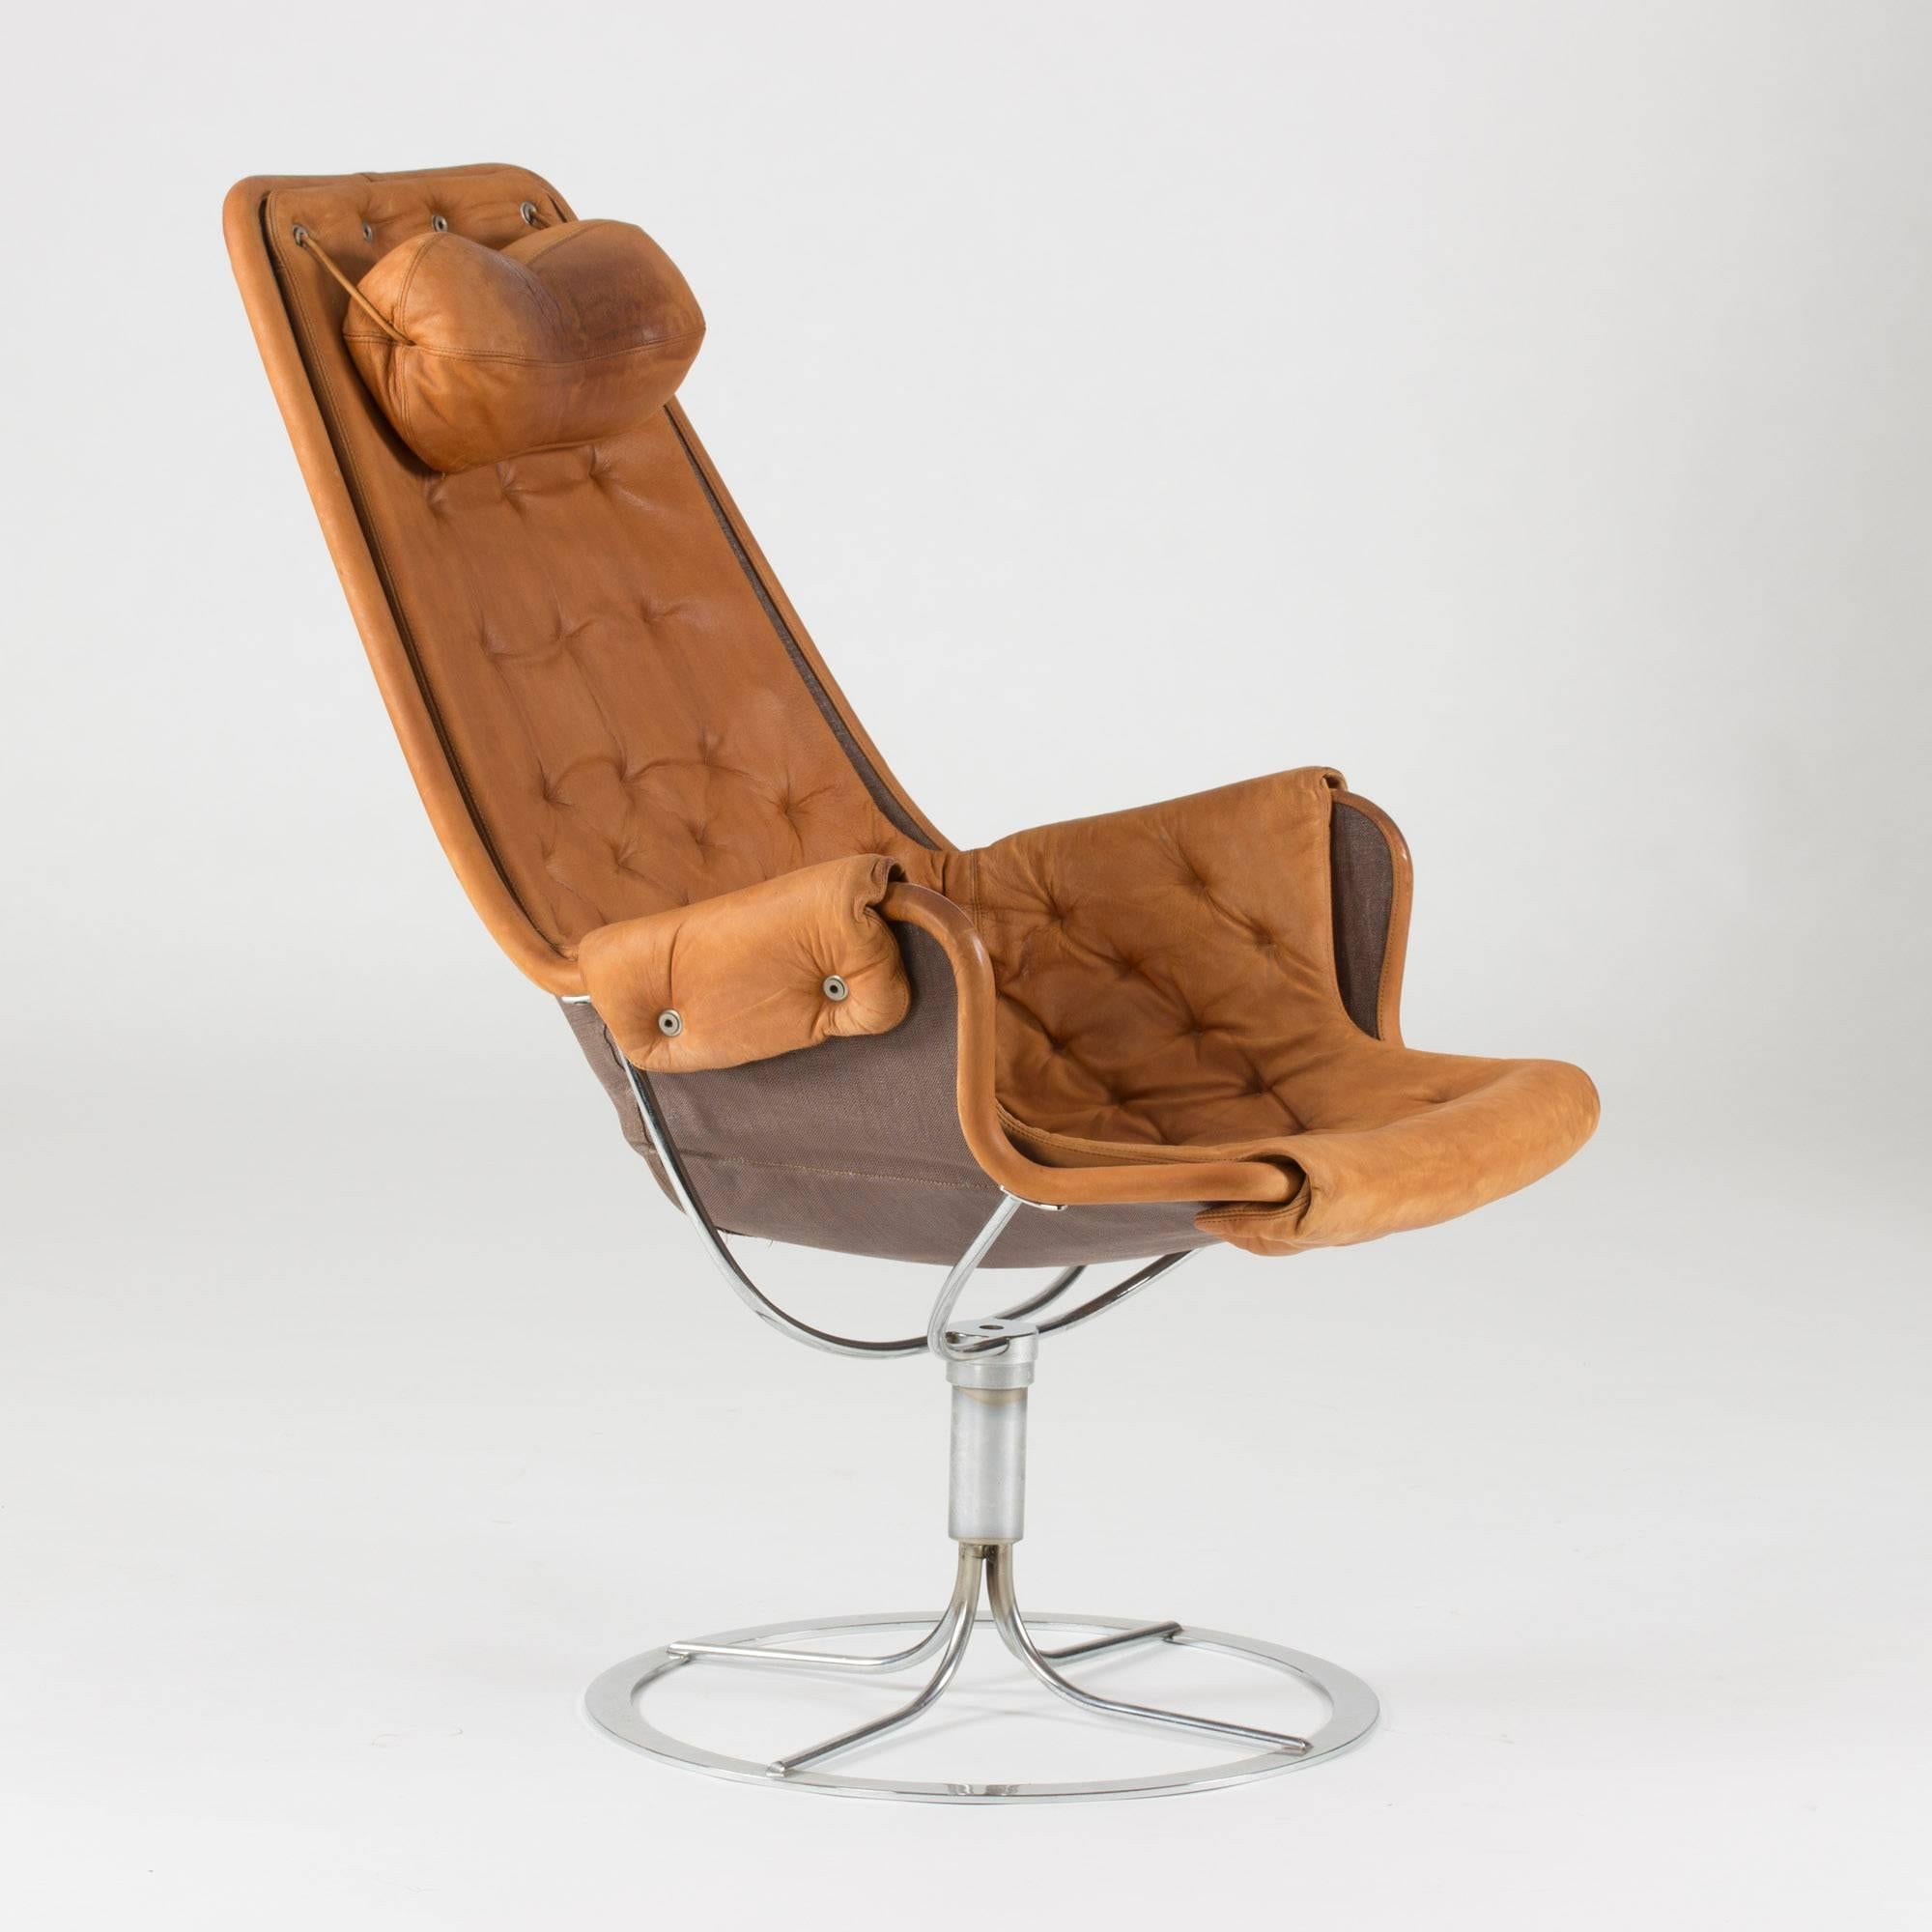 Iconic, timeless “Jetson” swivel lounge chair by Bruno Mathsson, designed in 1965, however this particular chair was produced during the 1970s. Canvas and cognac leather on a steel frame.